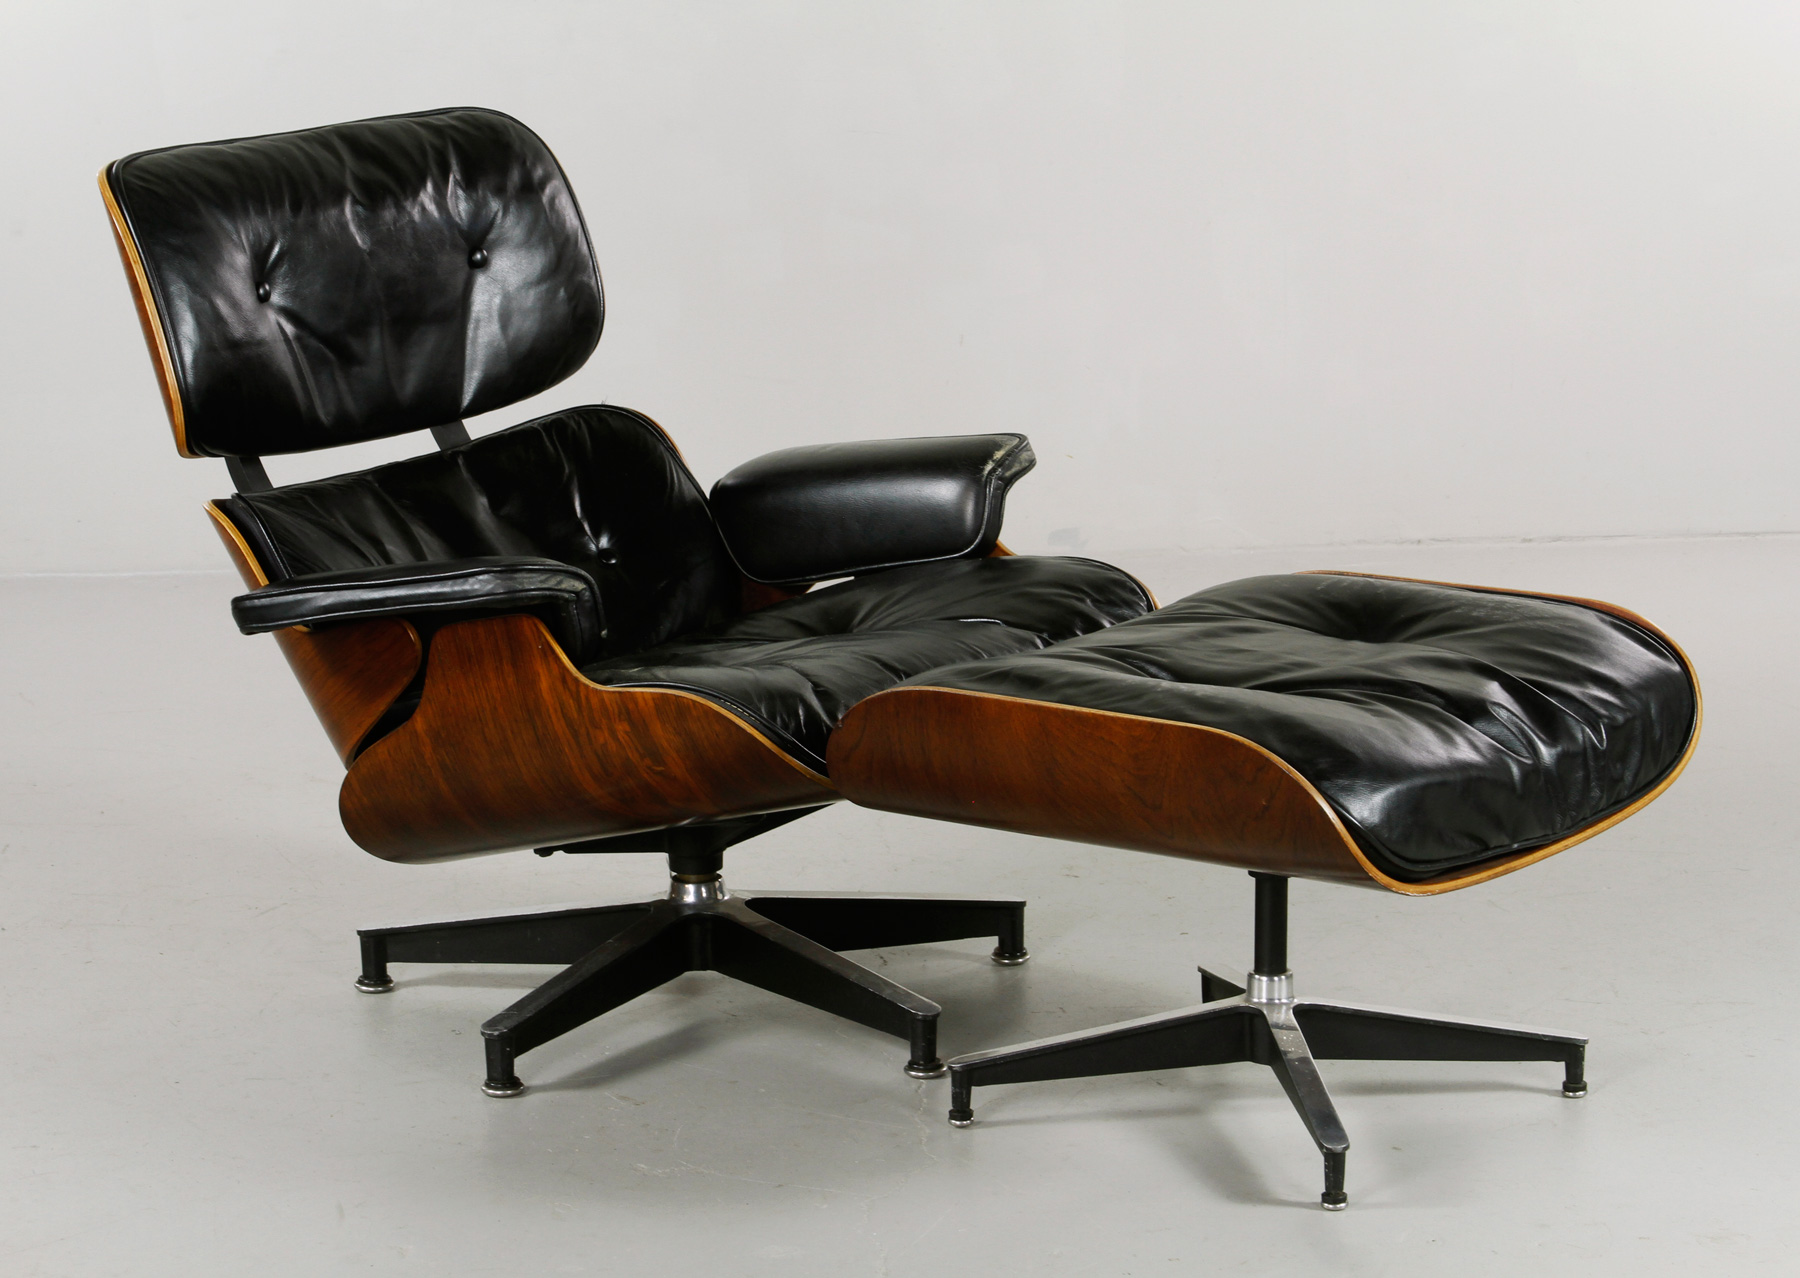 Charles and Ray Eames for Herman Miller chair and ottoman, chair with original label and original black leather, upholstery and rosewood shell